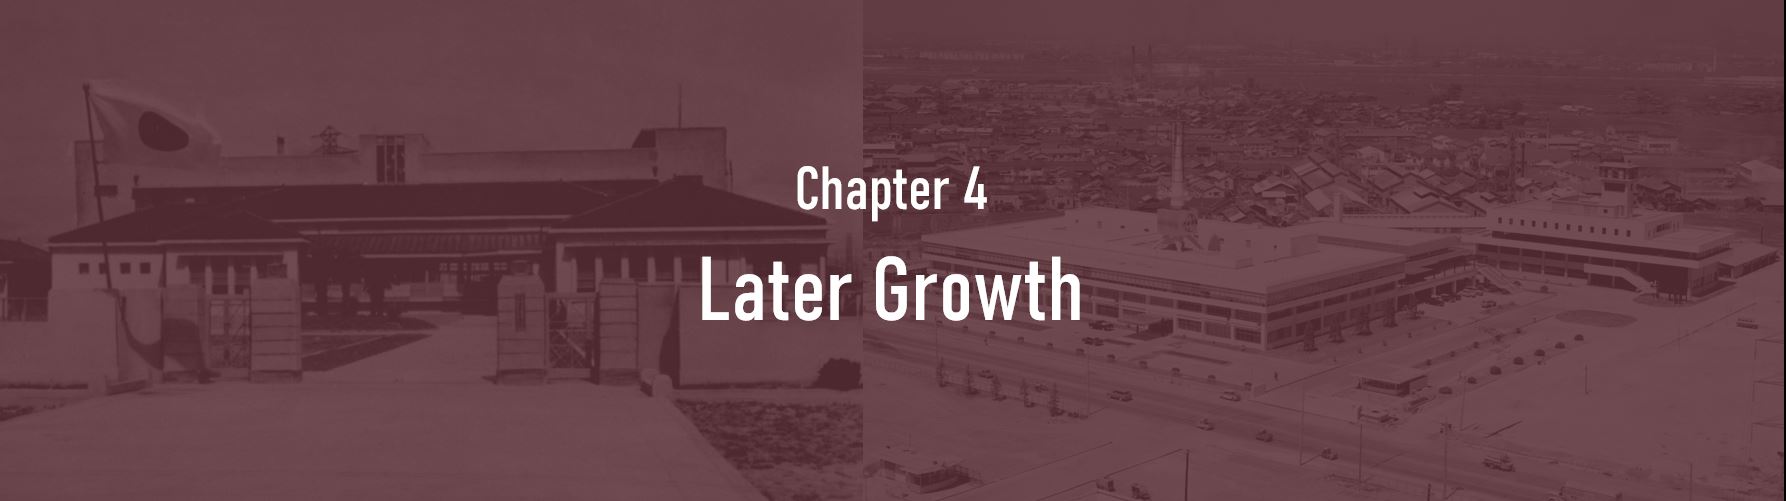 Chapter 4. Later Growth